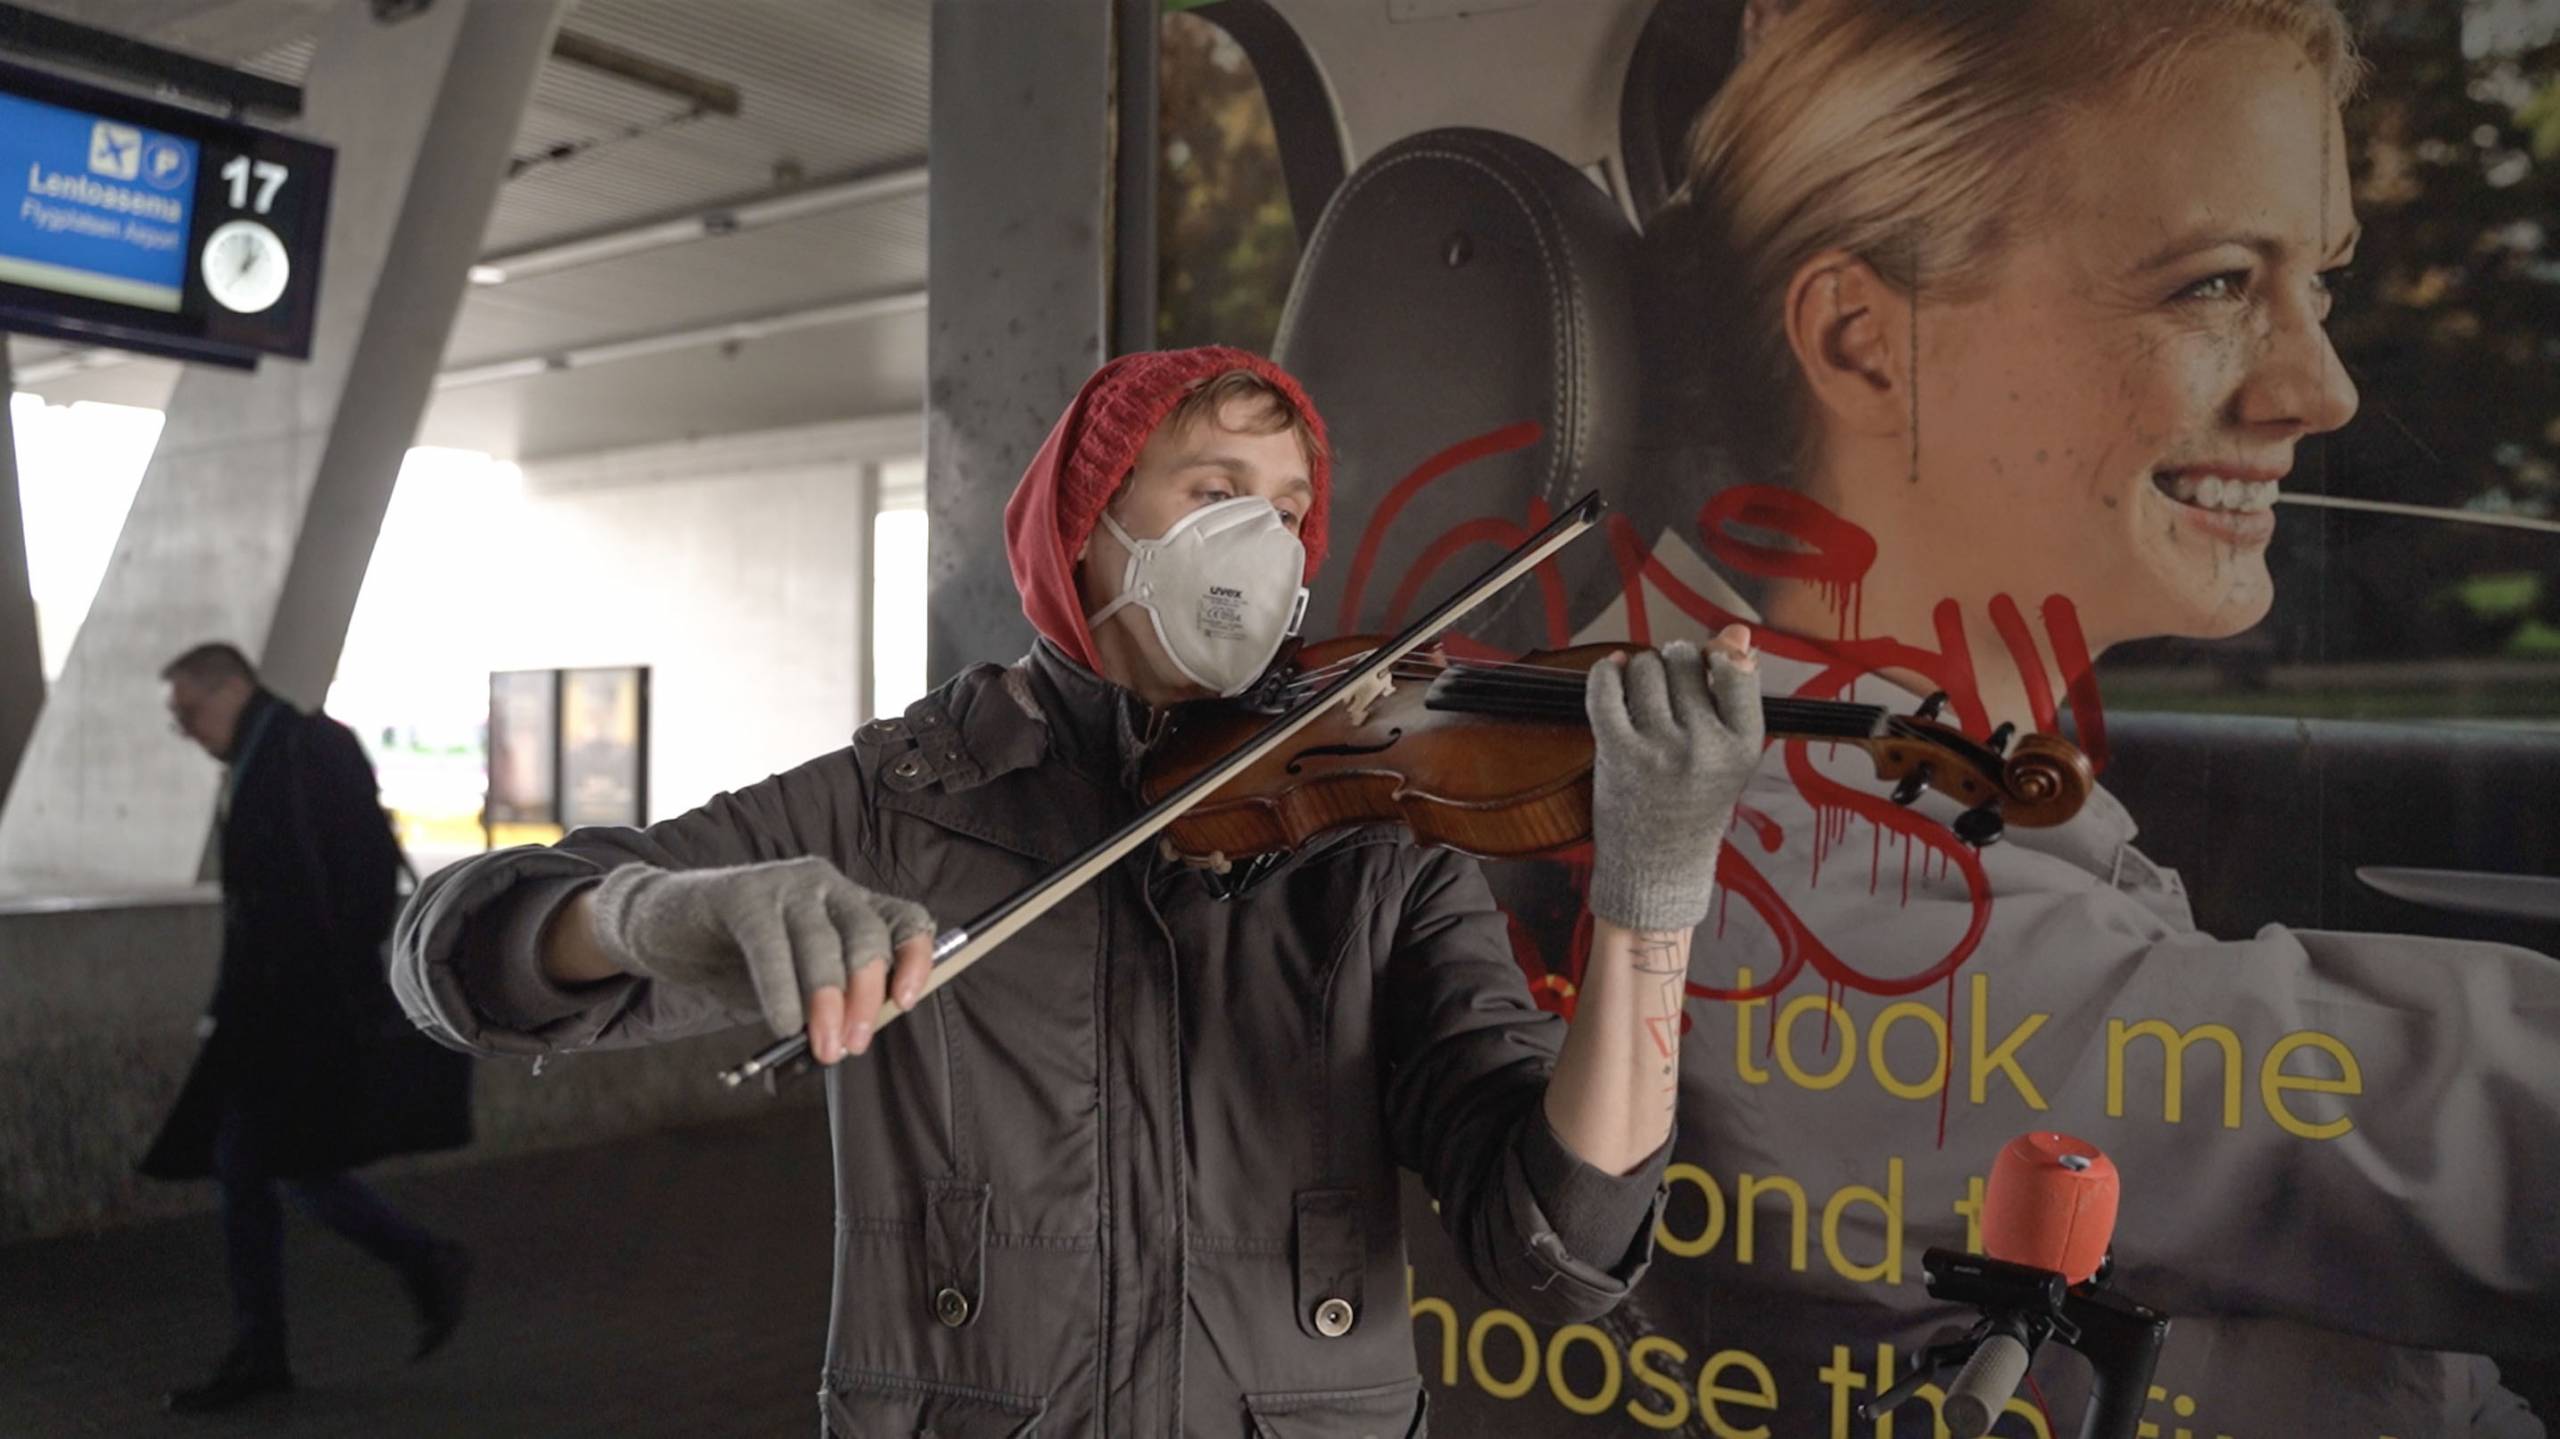 A man wearing a face mask plays the violin at the railway station.